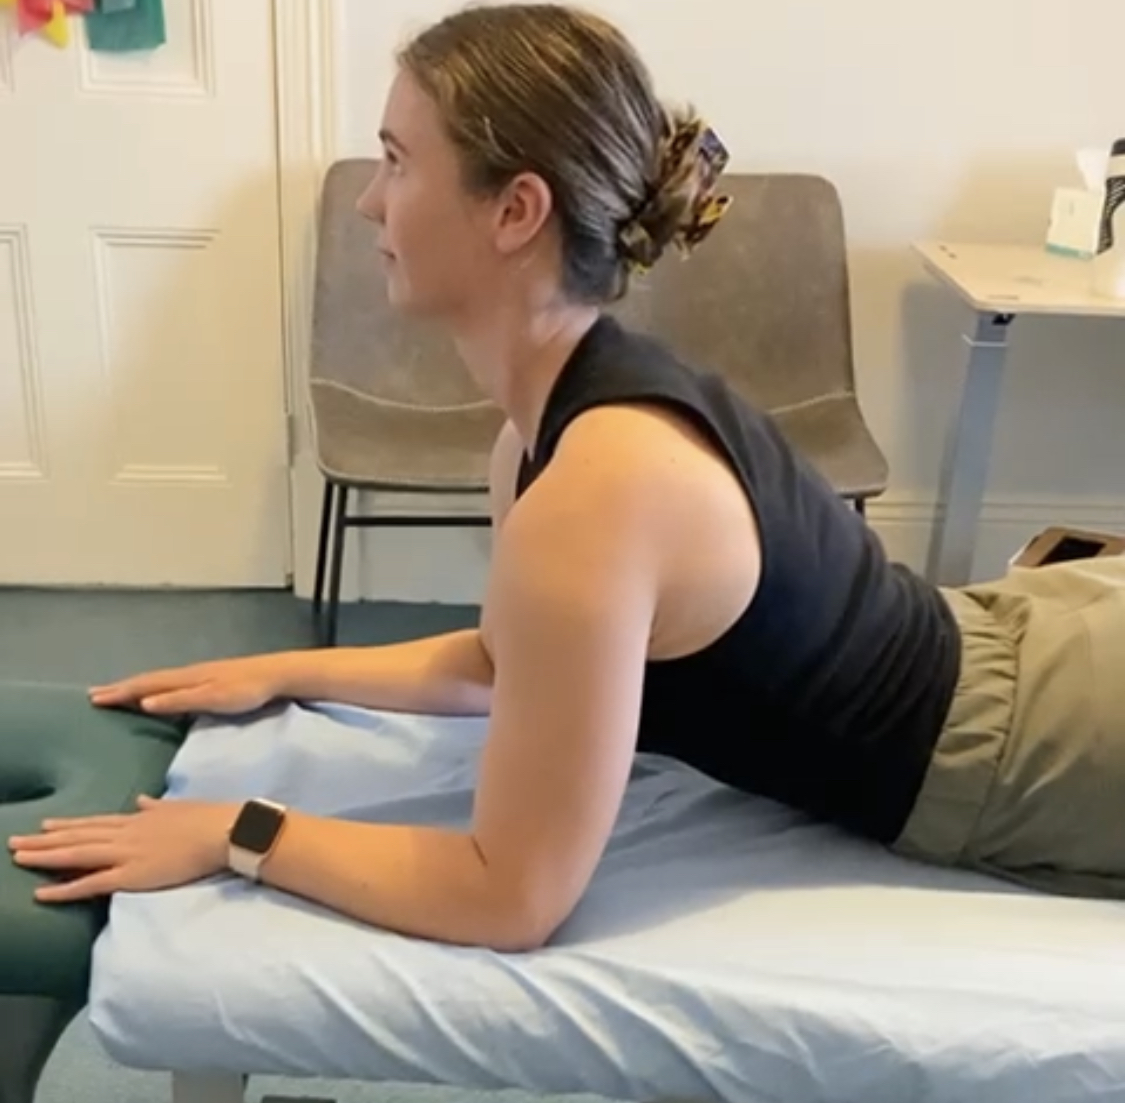 adelaide osteopath resilient health chiropractor massage osteopathy sphinx2